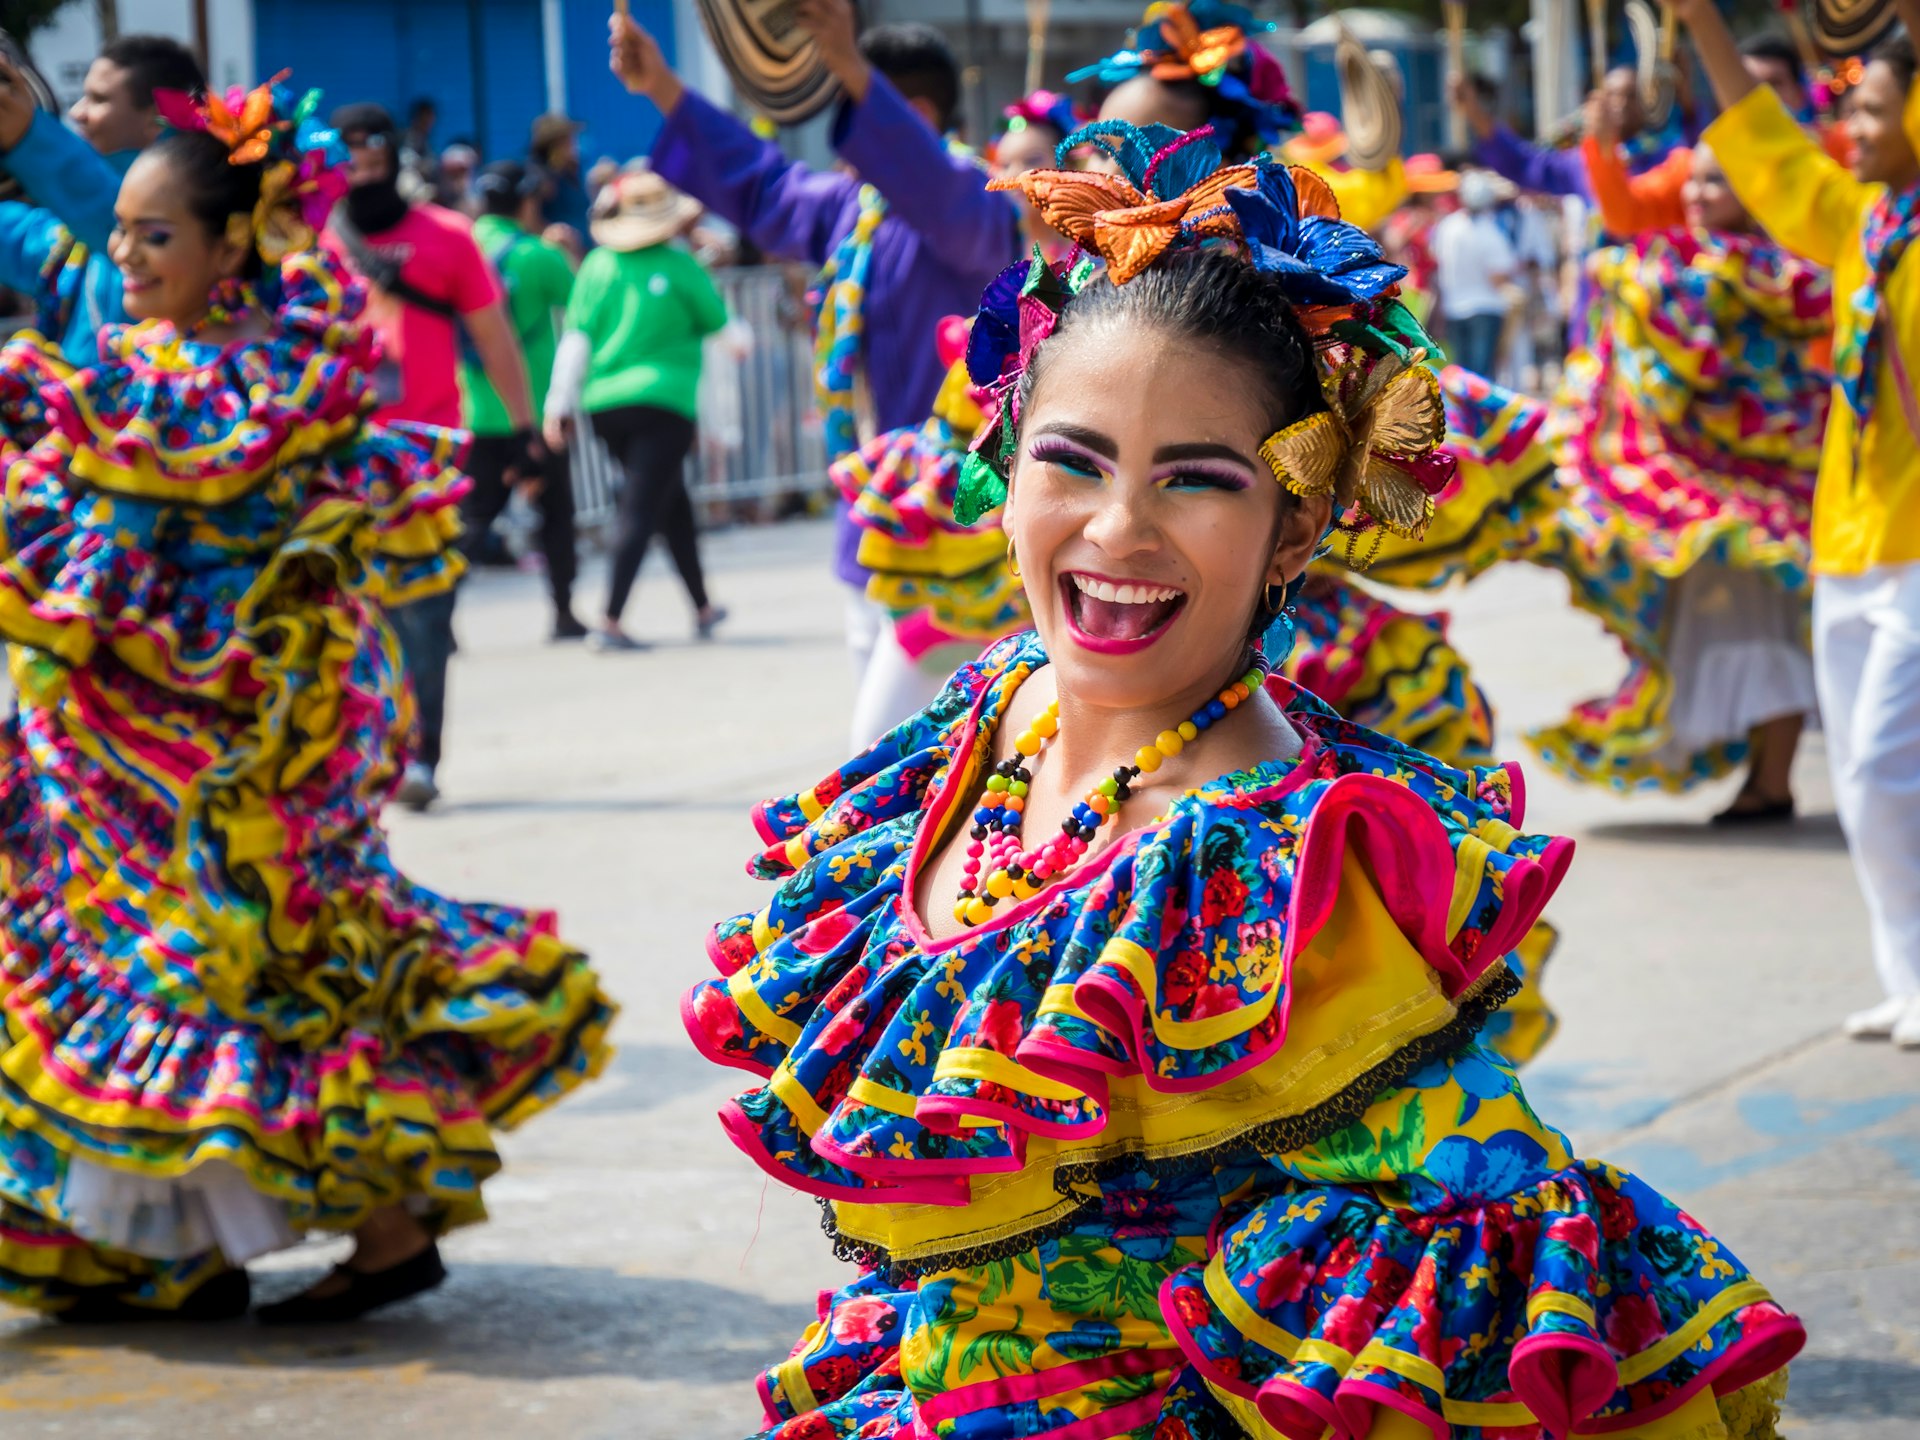 Dancers in colorful dress move along a street parade